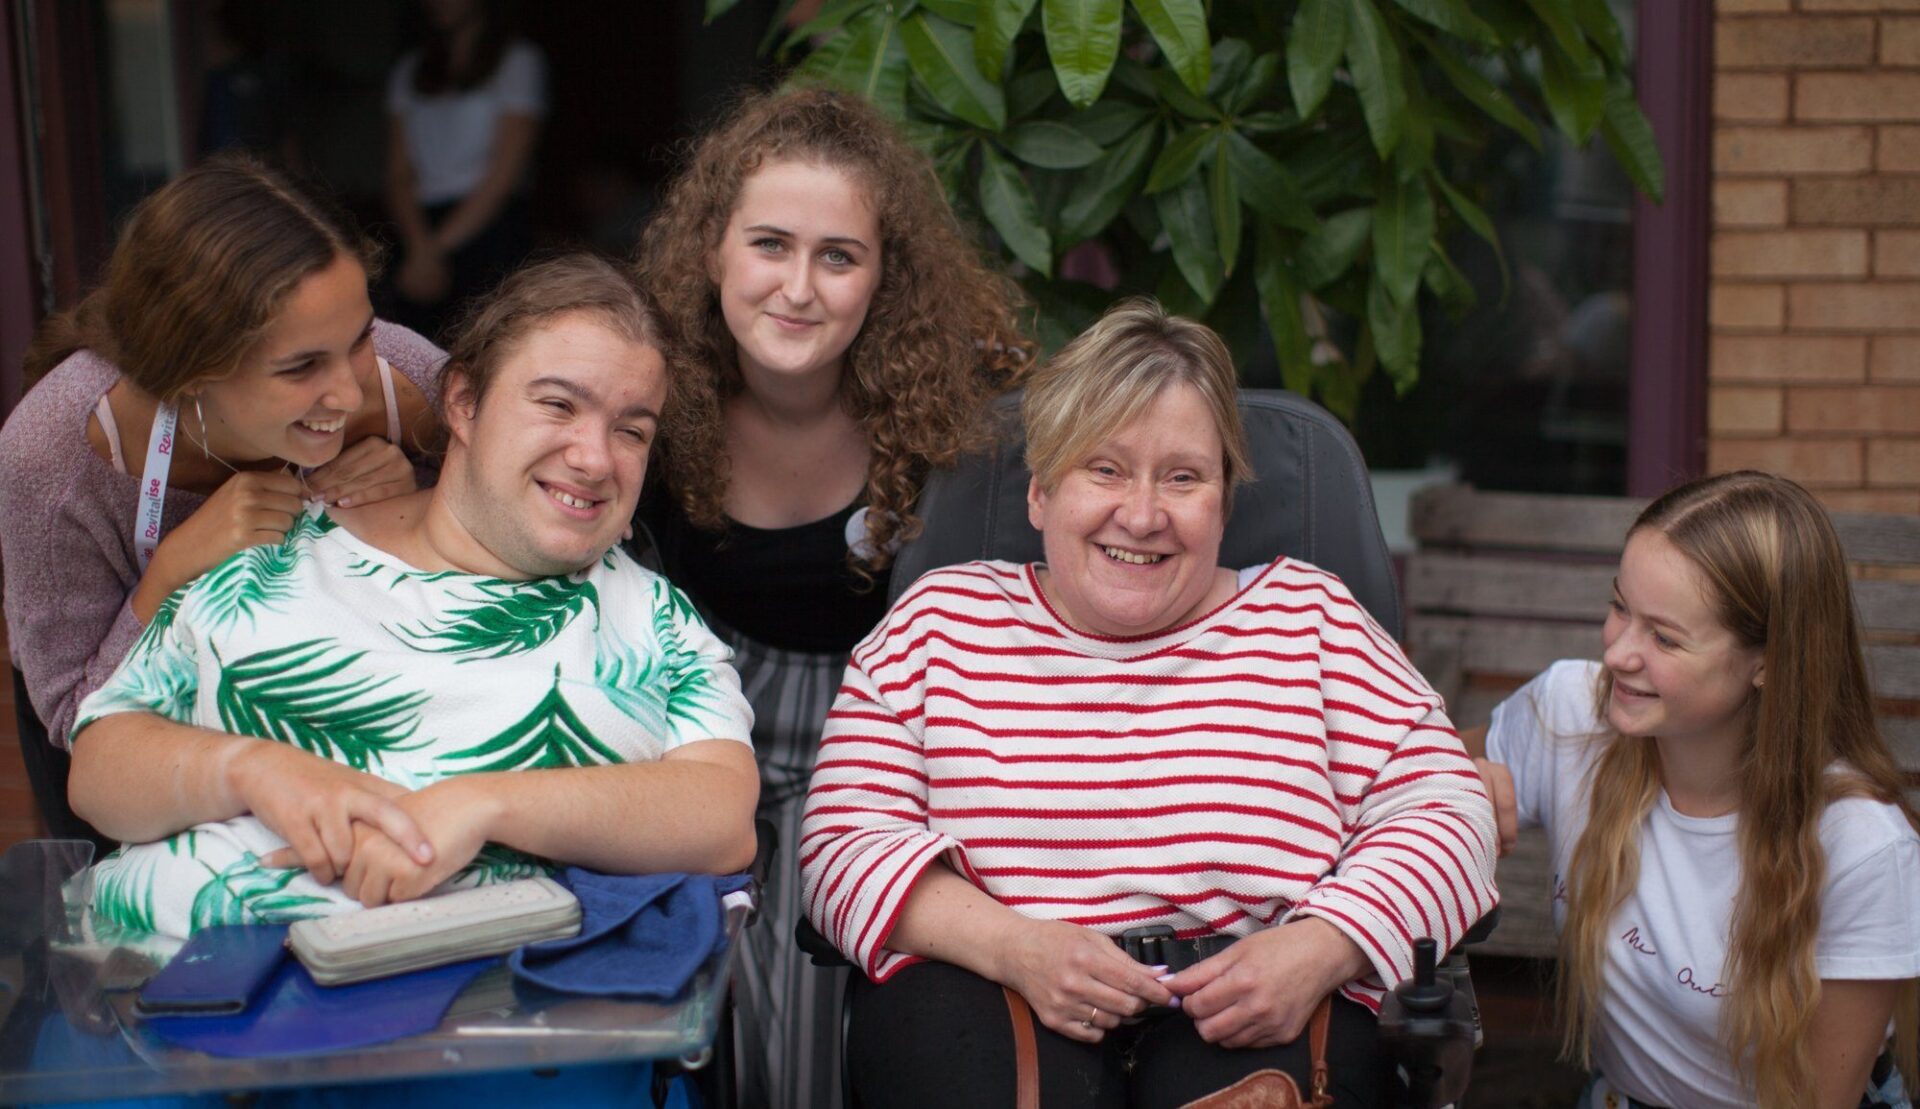 Two Revitalise guests in wheelchairs supported by three friendly and smiling young female volunteers